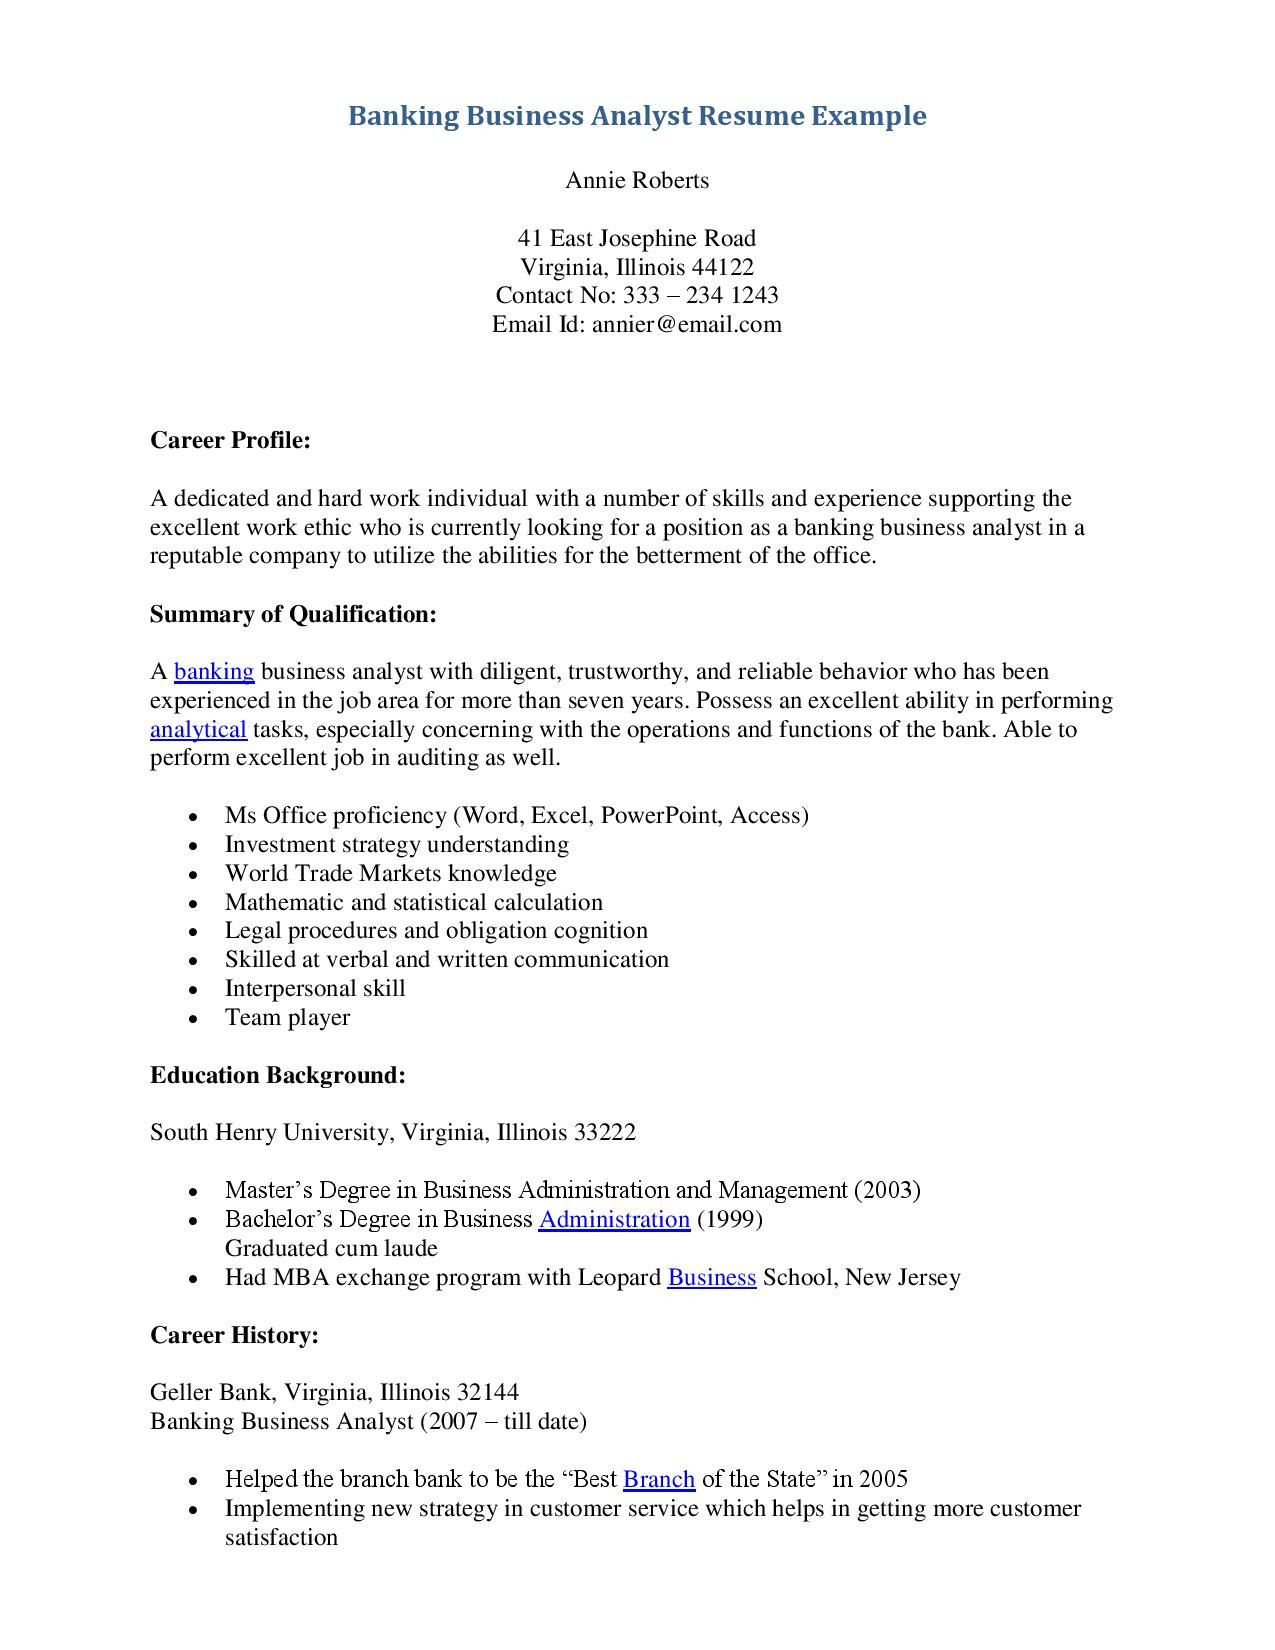 Investment Banking Business Analyst Sample Resume Digital Banking Business Analyst Resume October 2021